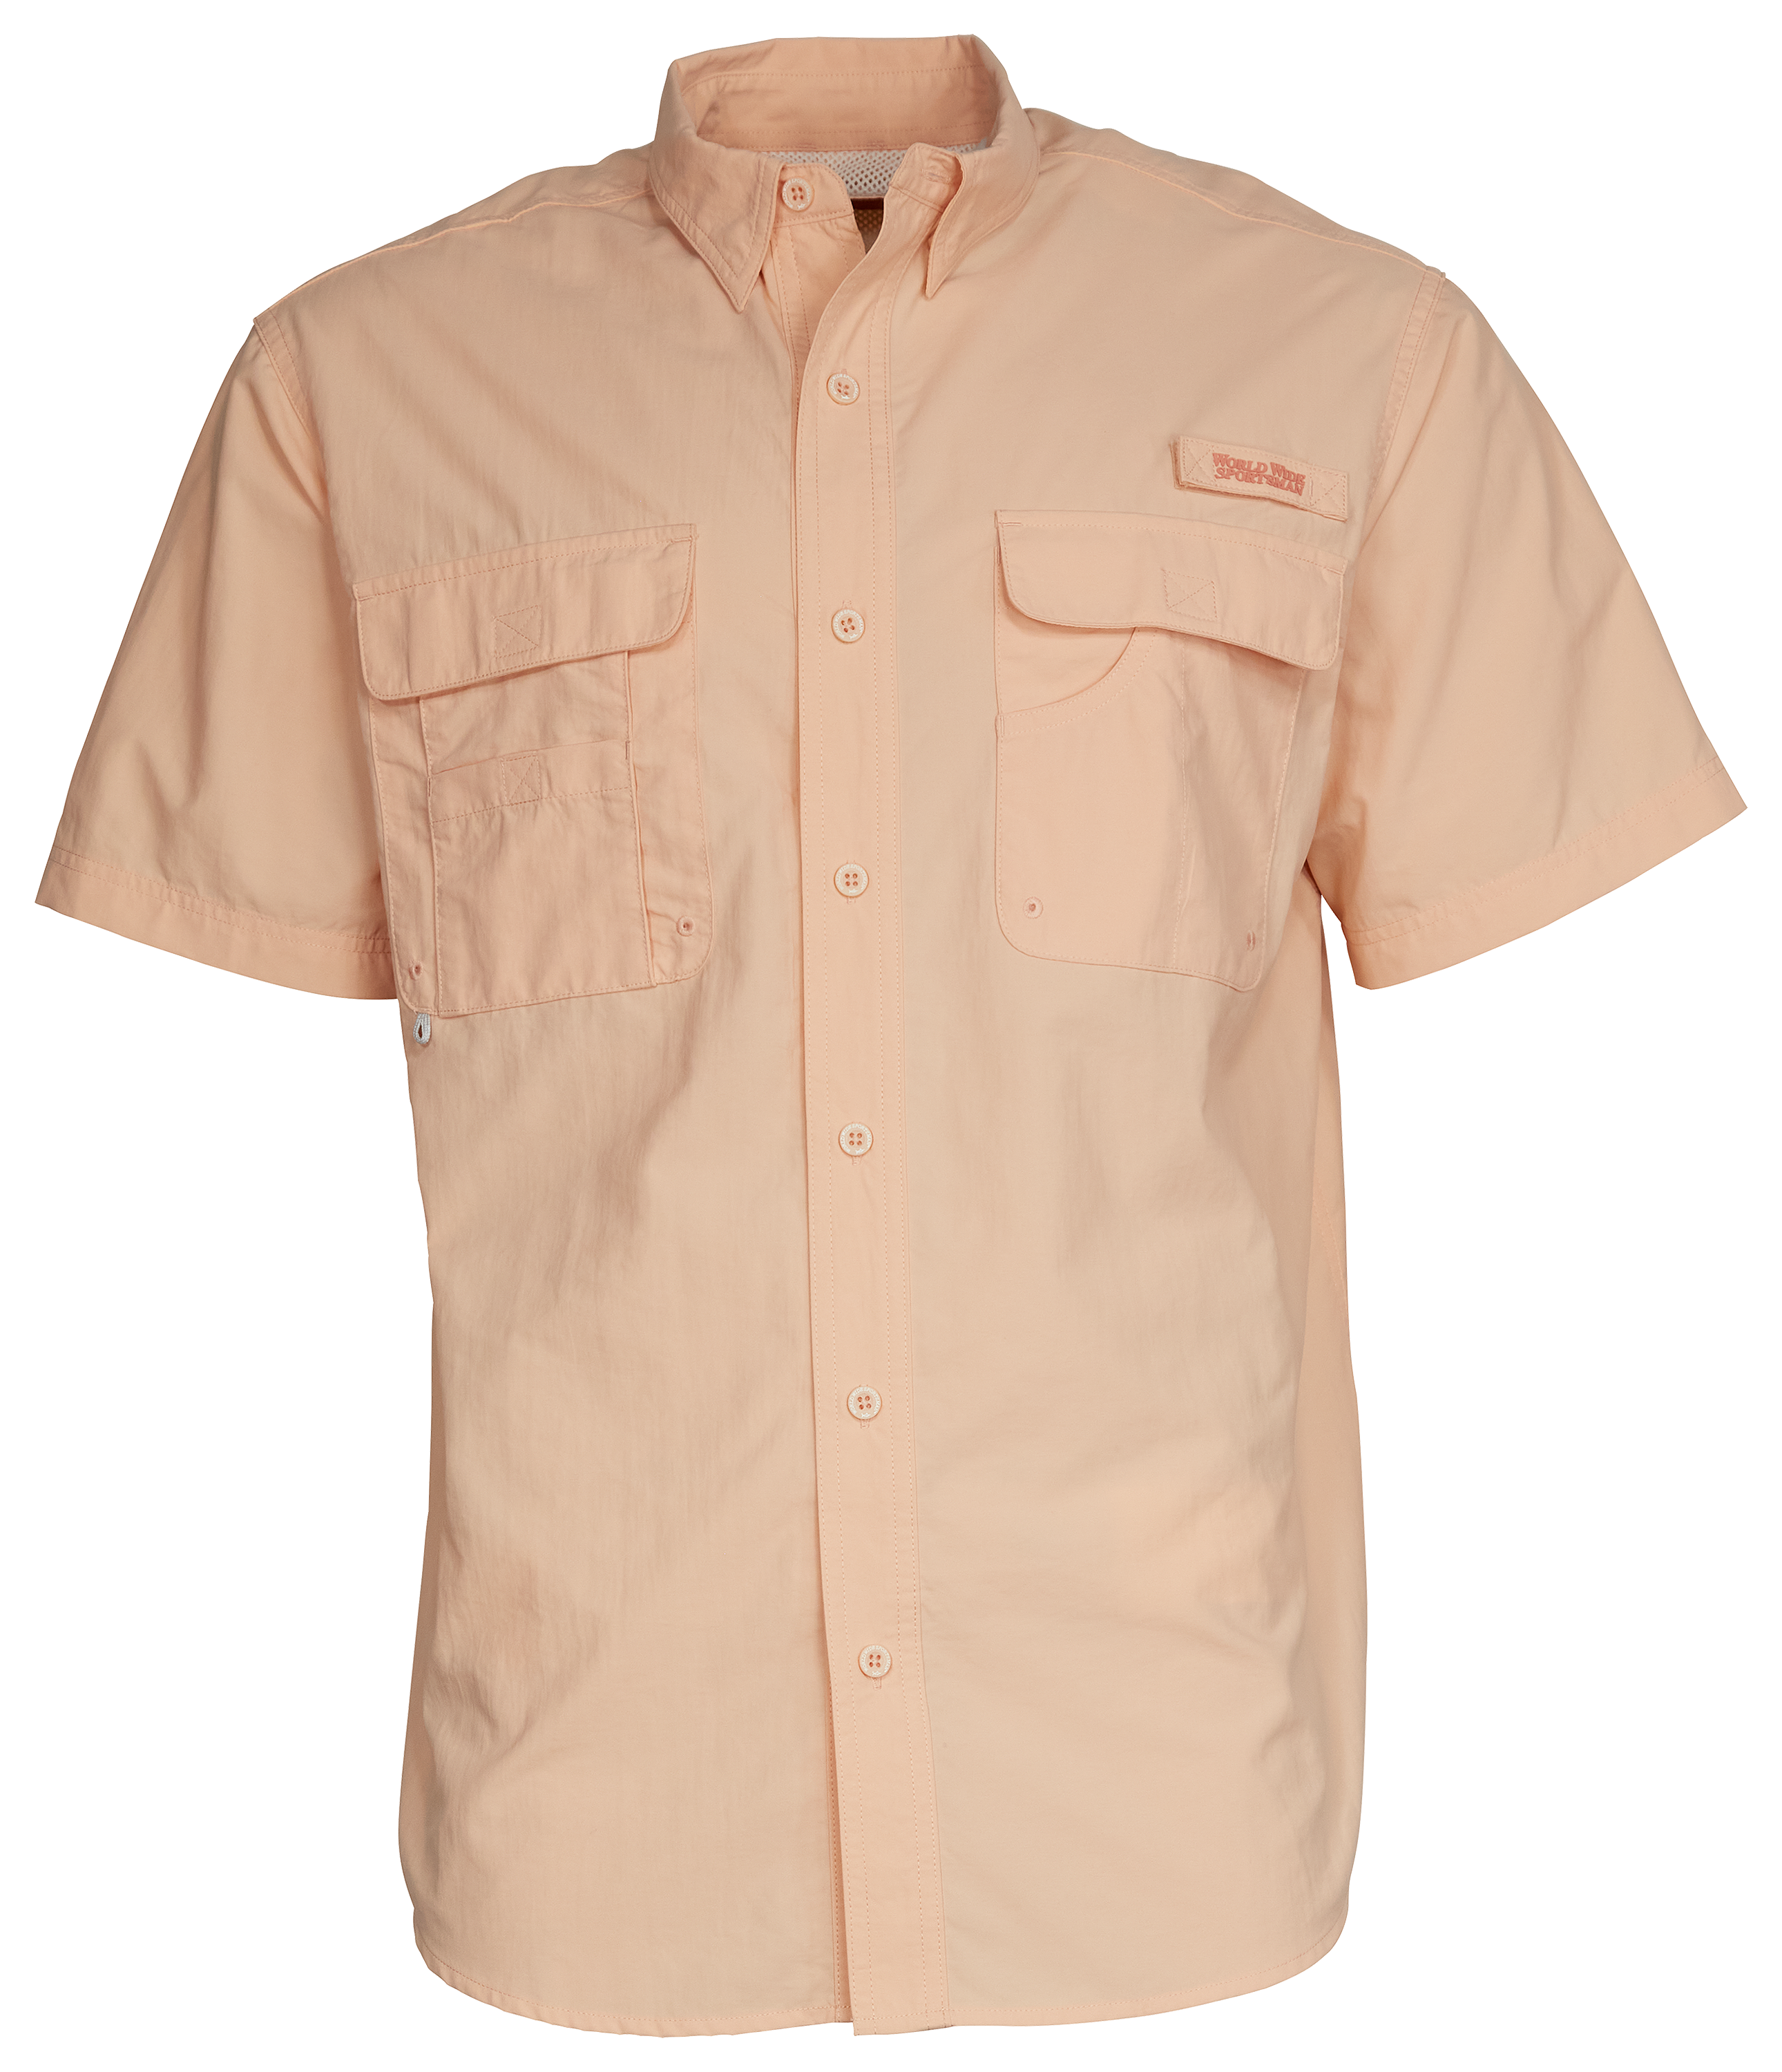 World Wide Sportsman Recycled-Nylon Angler 2.0 Short-Sleeve Button-Down Shirt for Men - Almost Apricot - S